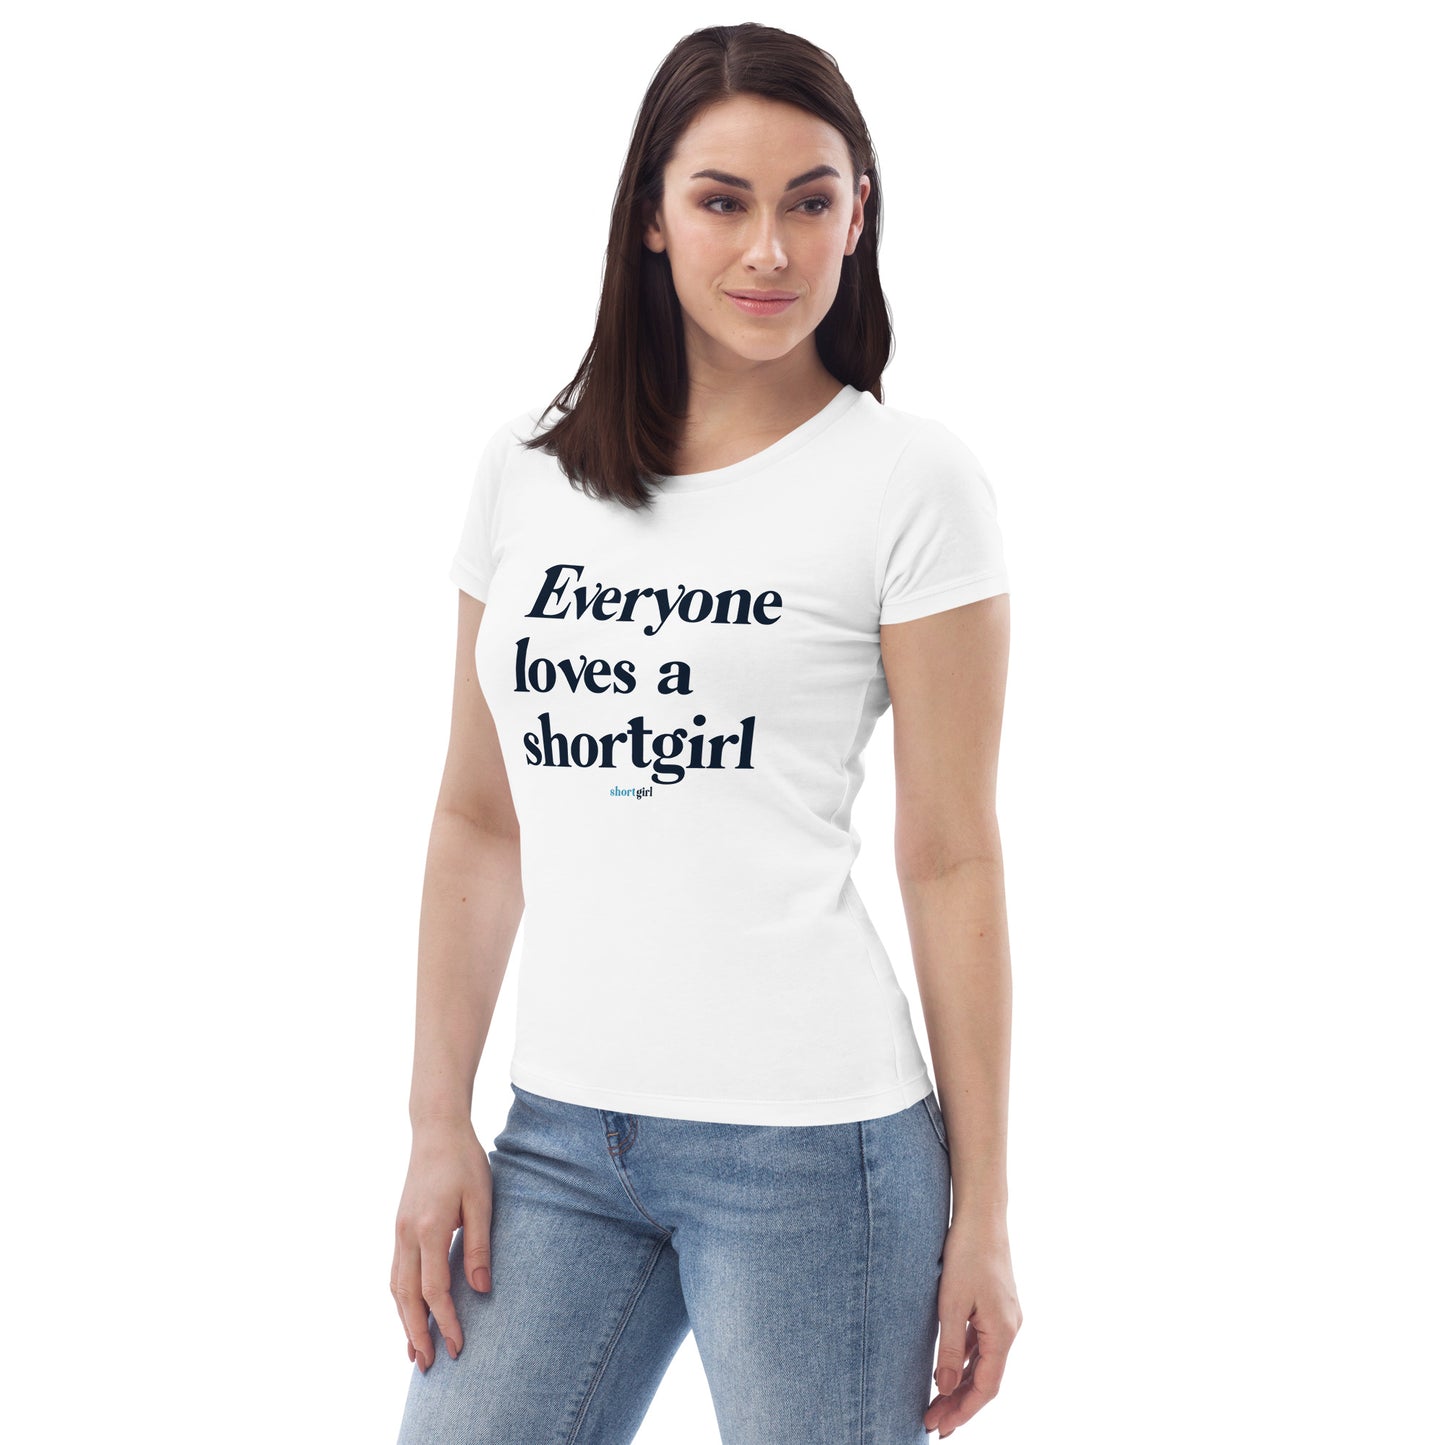 Women's fitted eco tee - Everyone loves a shortgirl